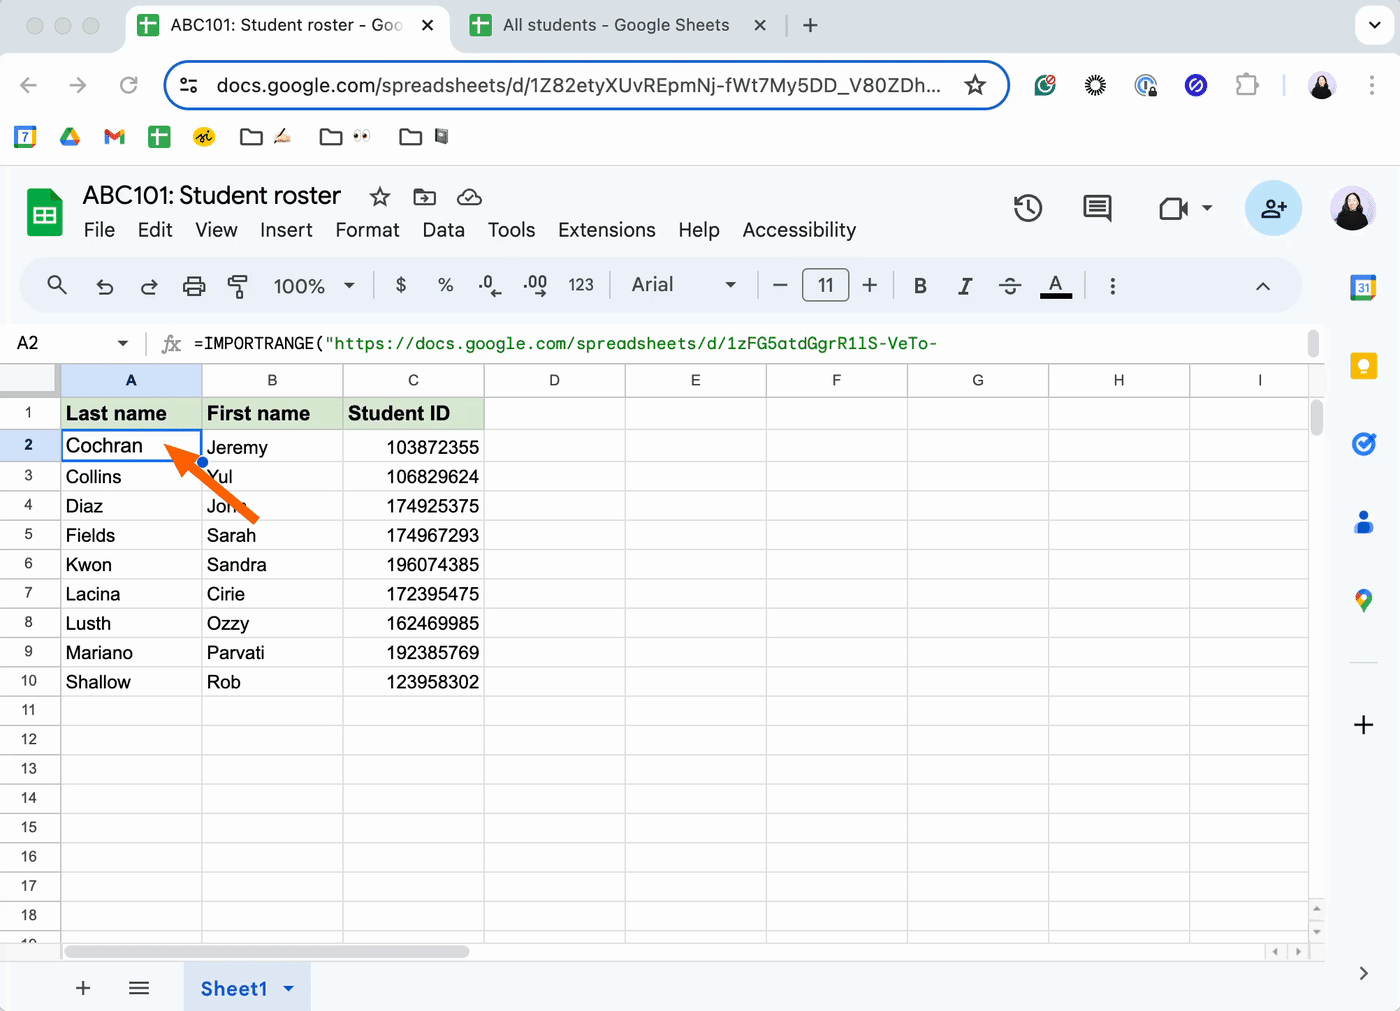 Demo of changing data in the source spreadsheet and having those changes automatically reflected in the destination spreadsheet.